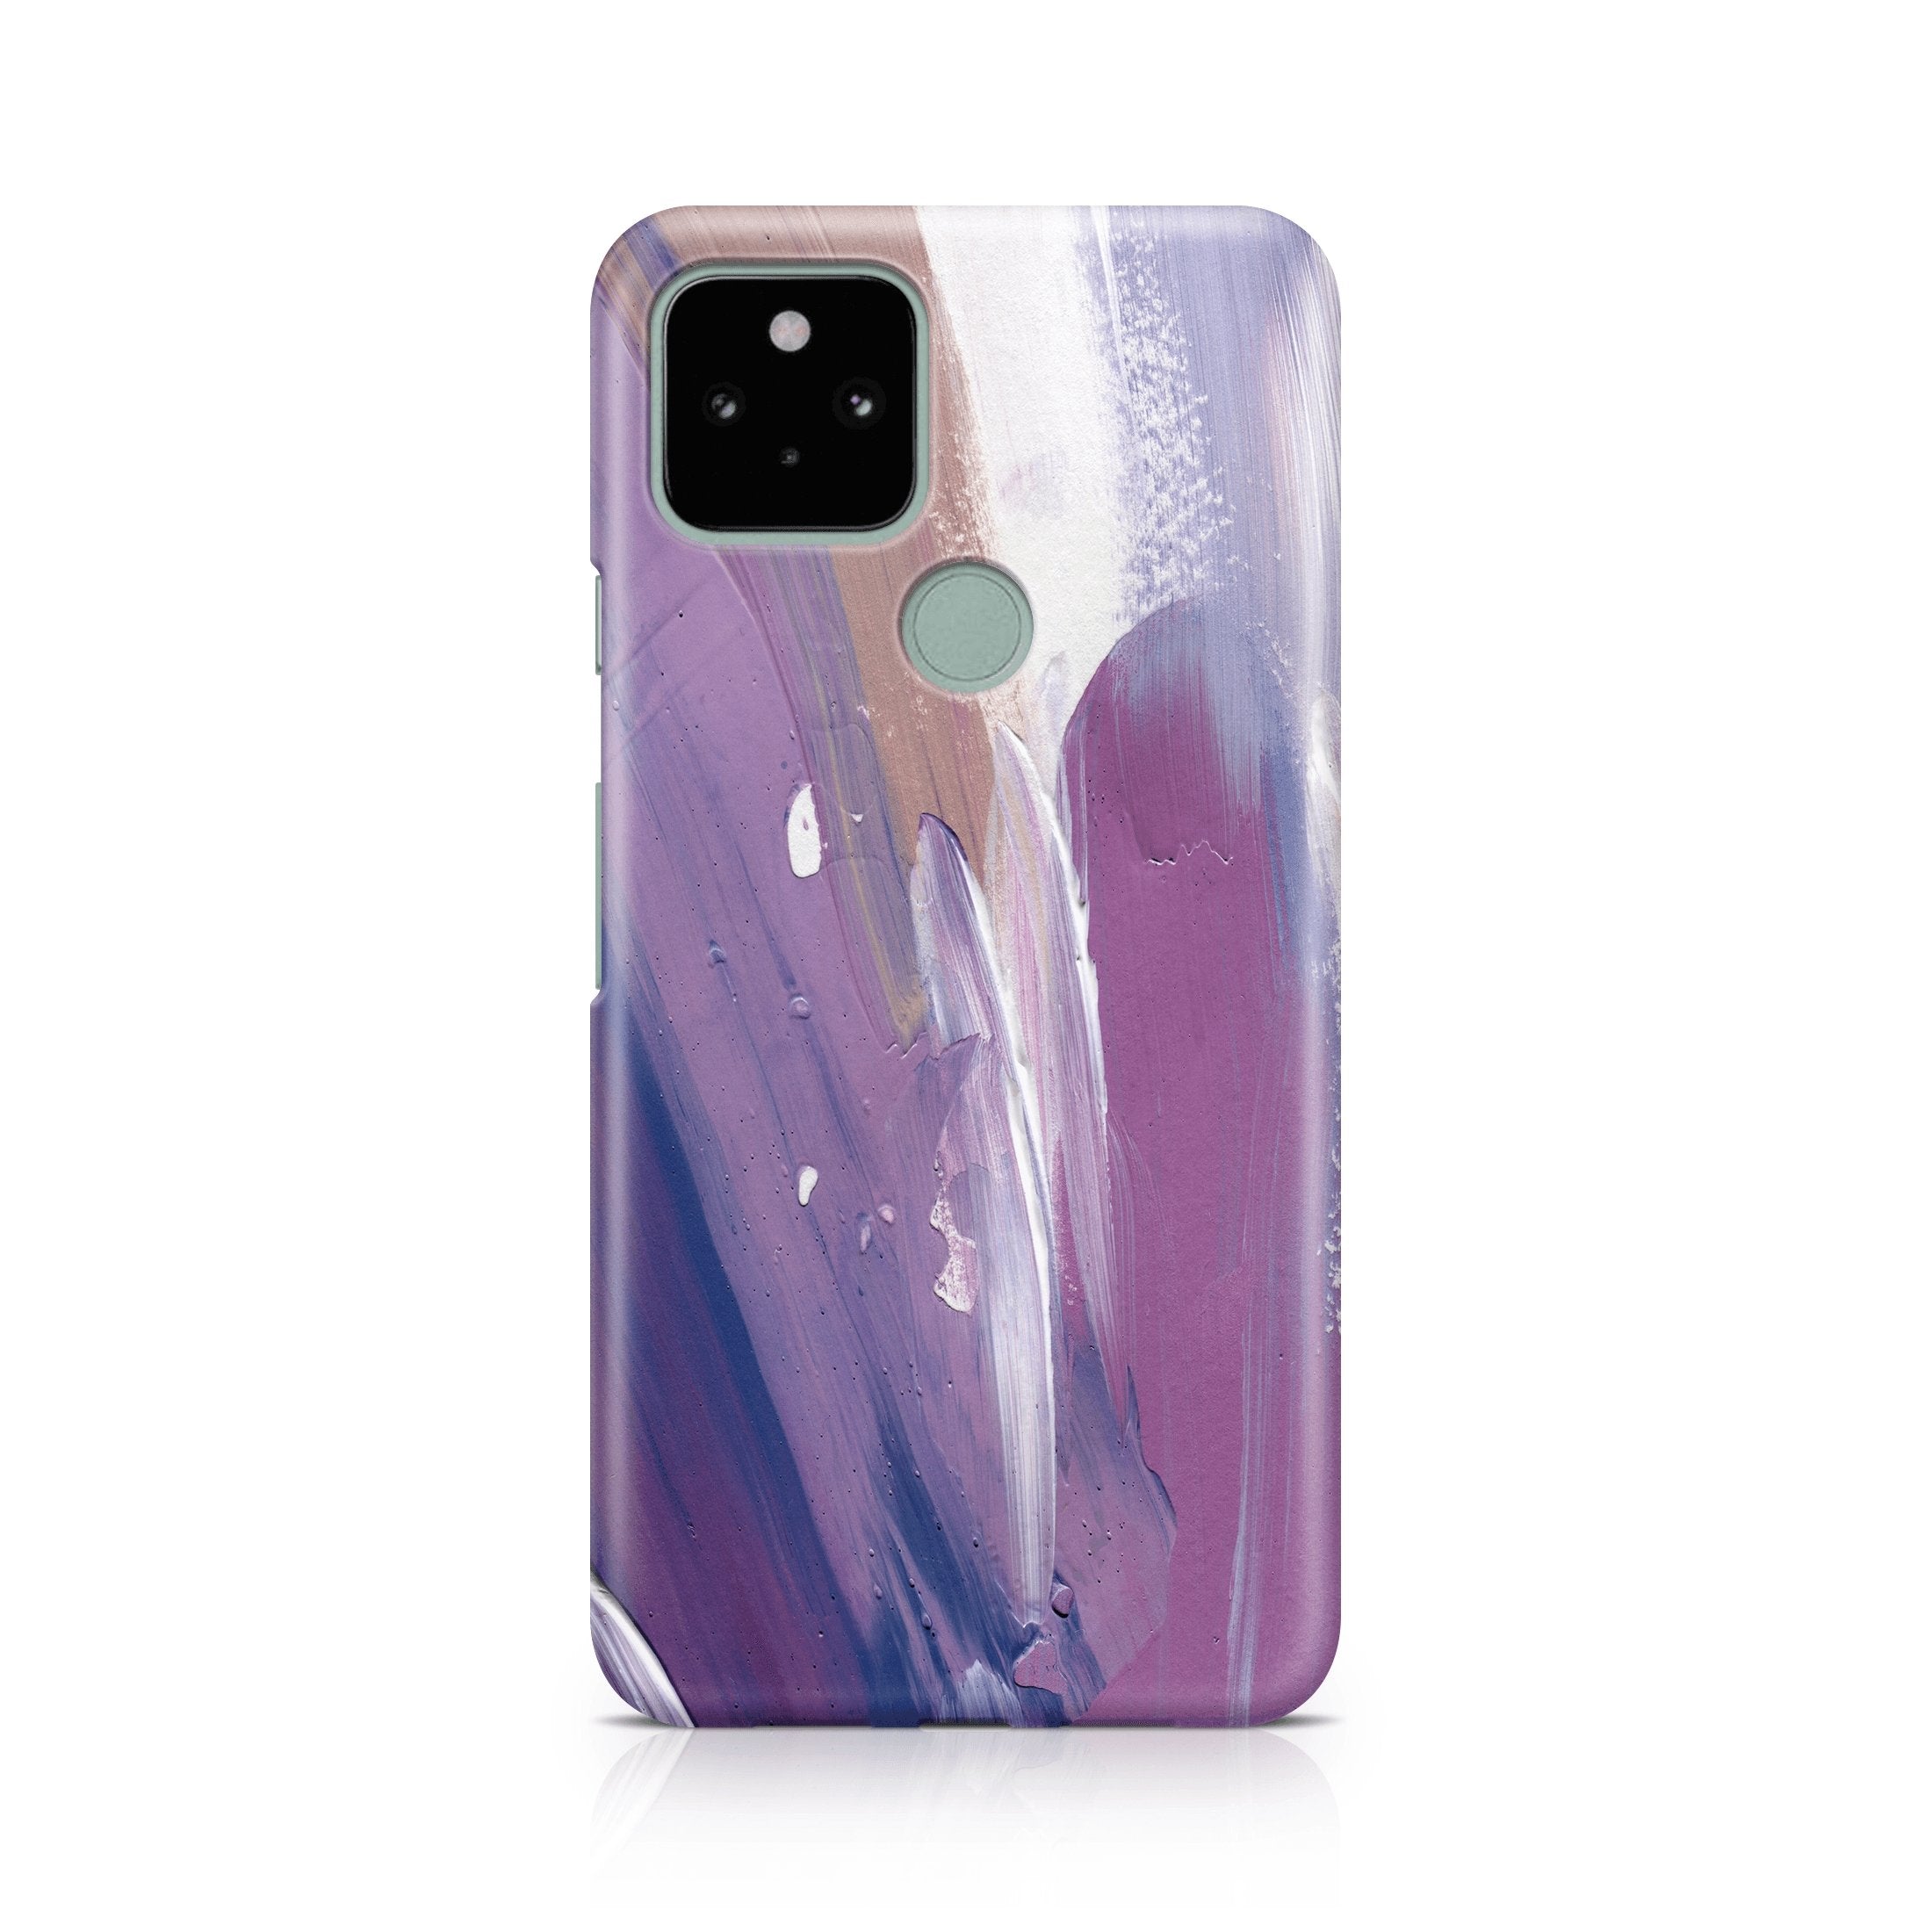 Makeup Blender II - Google phone case designs by CaseSwagger